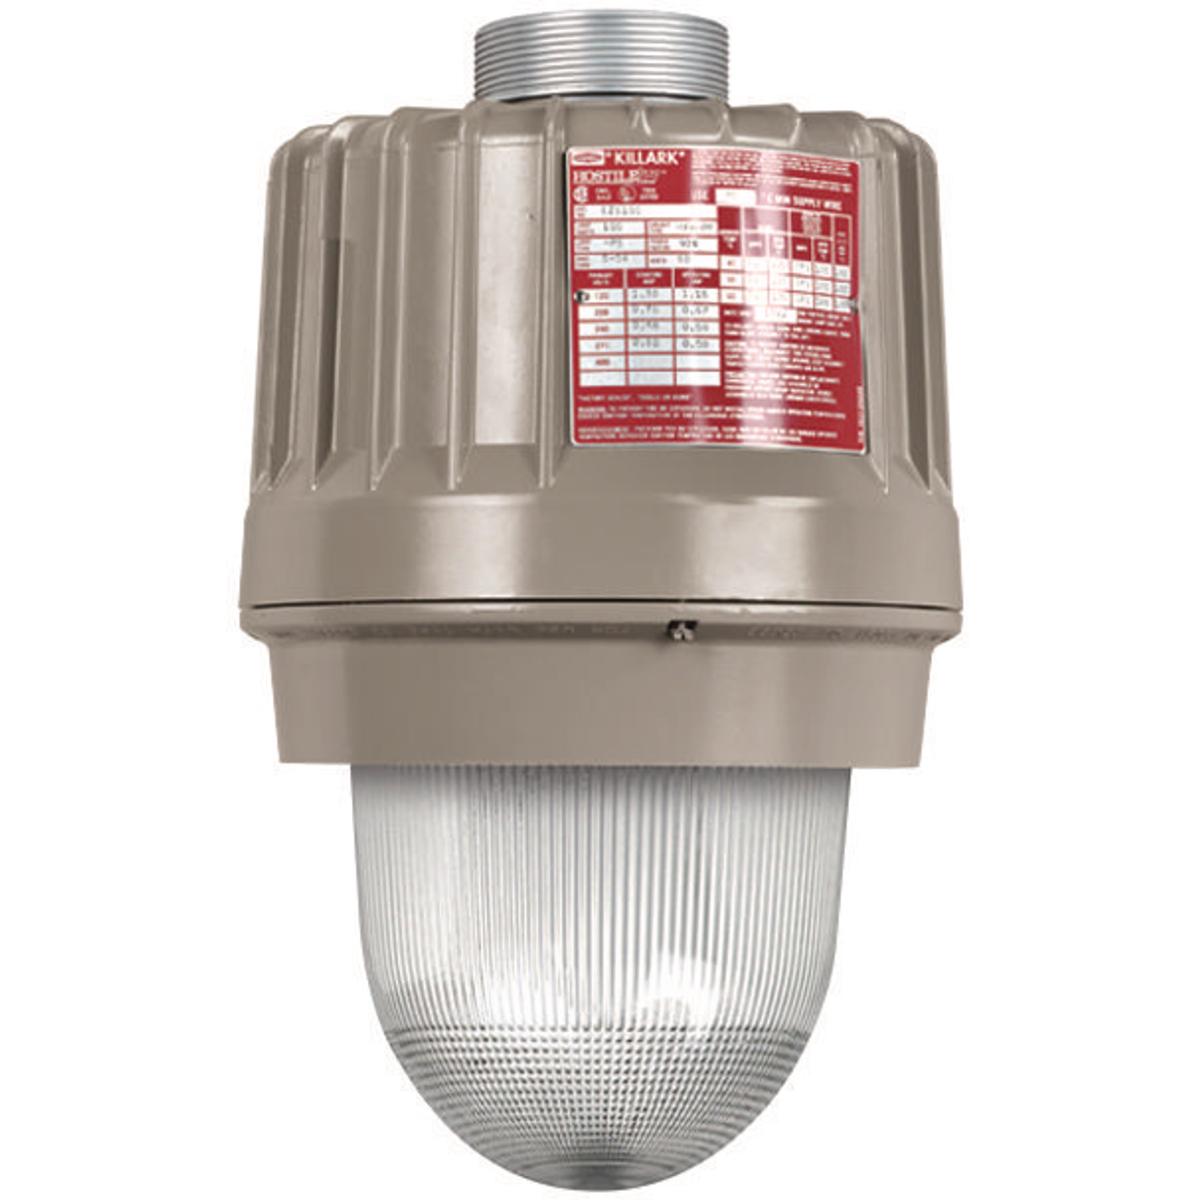 Hubbell EZS076 70W 347V High Pressure Sodium  ; Three light sources – High Pressure Sodium (50-400W), Metal Halide (70-400W) and Pulse Start Metal Halide (175-400W) ; Mounting choice –Pendant, ceiling, 25˚ stanchion or 90˚ wall mount, all with “wireless” design that all